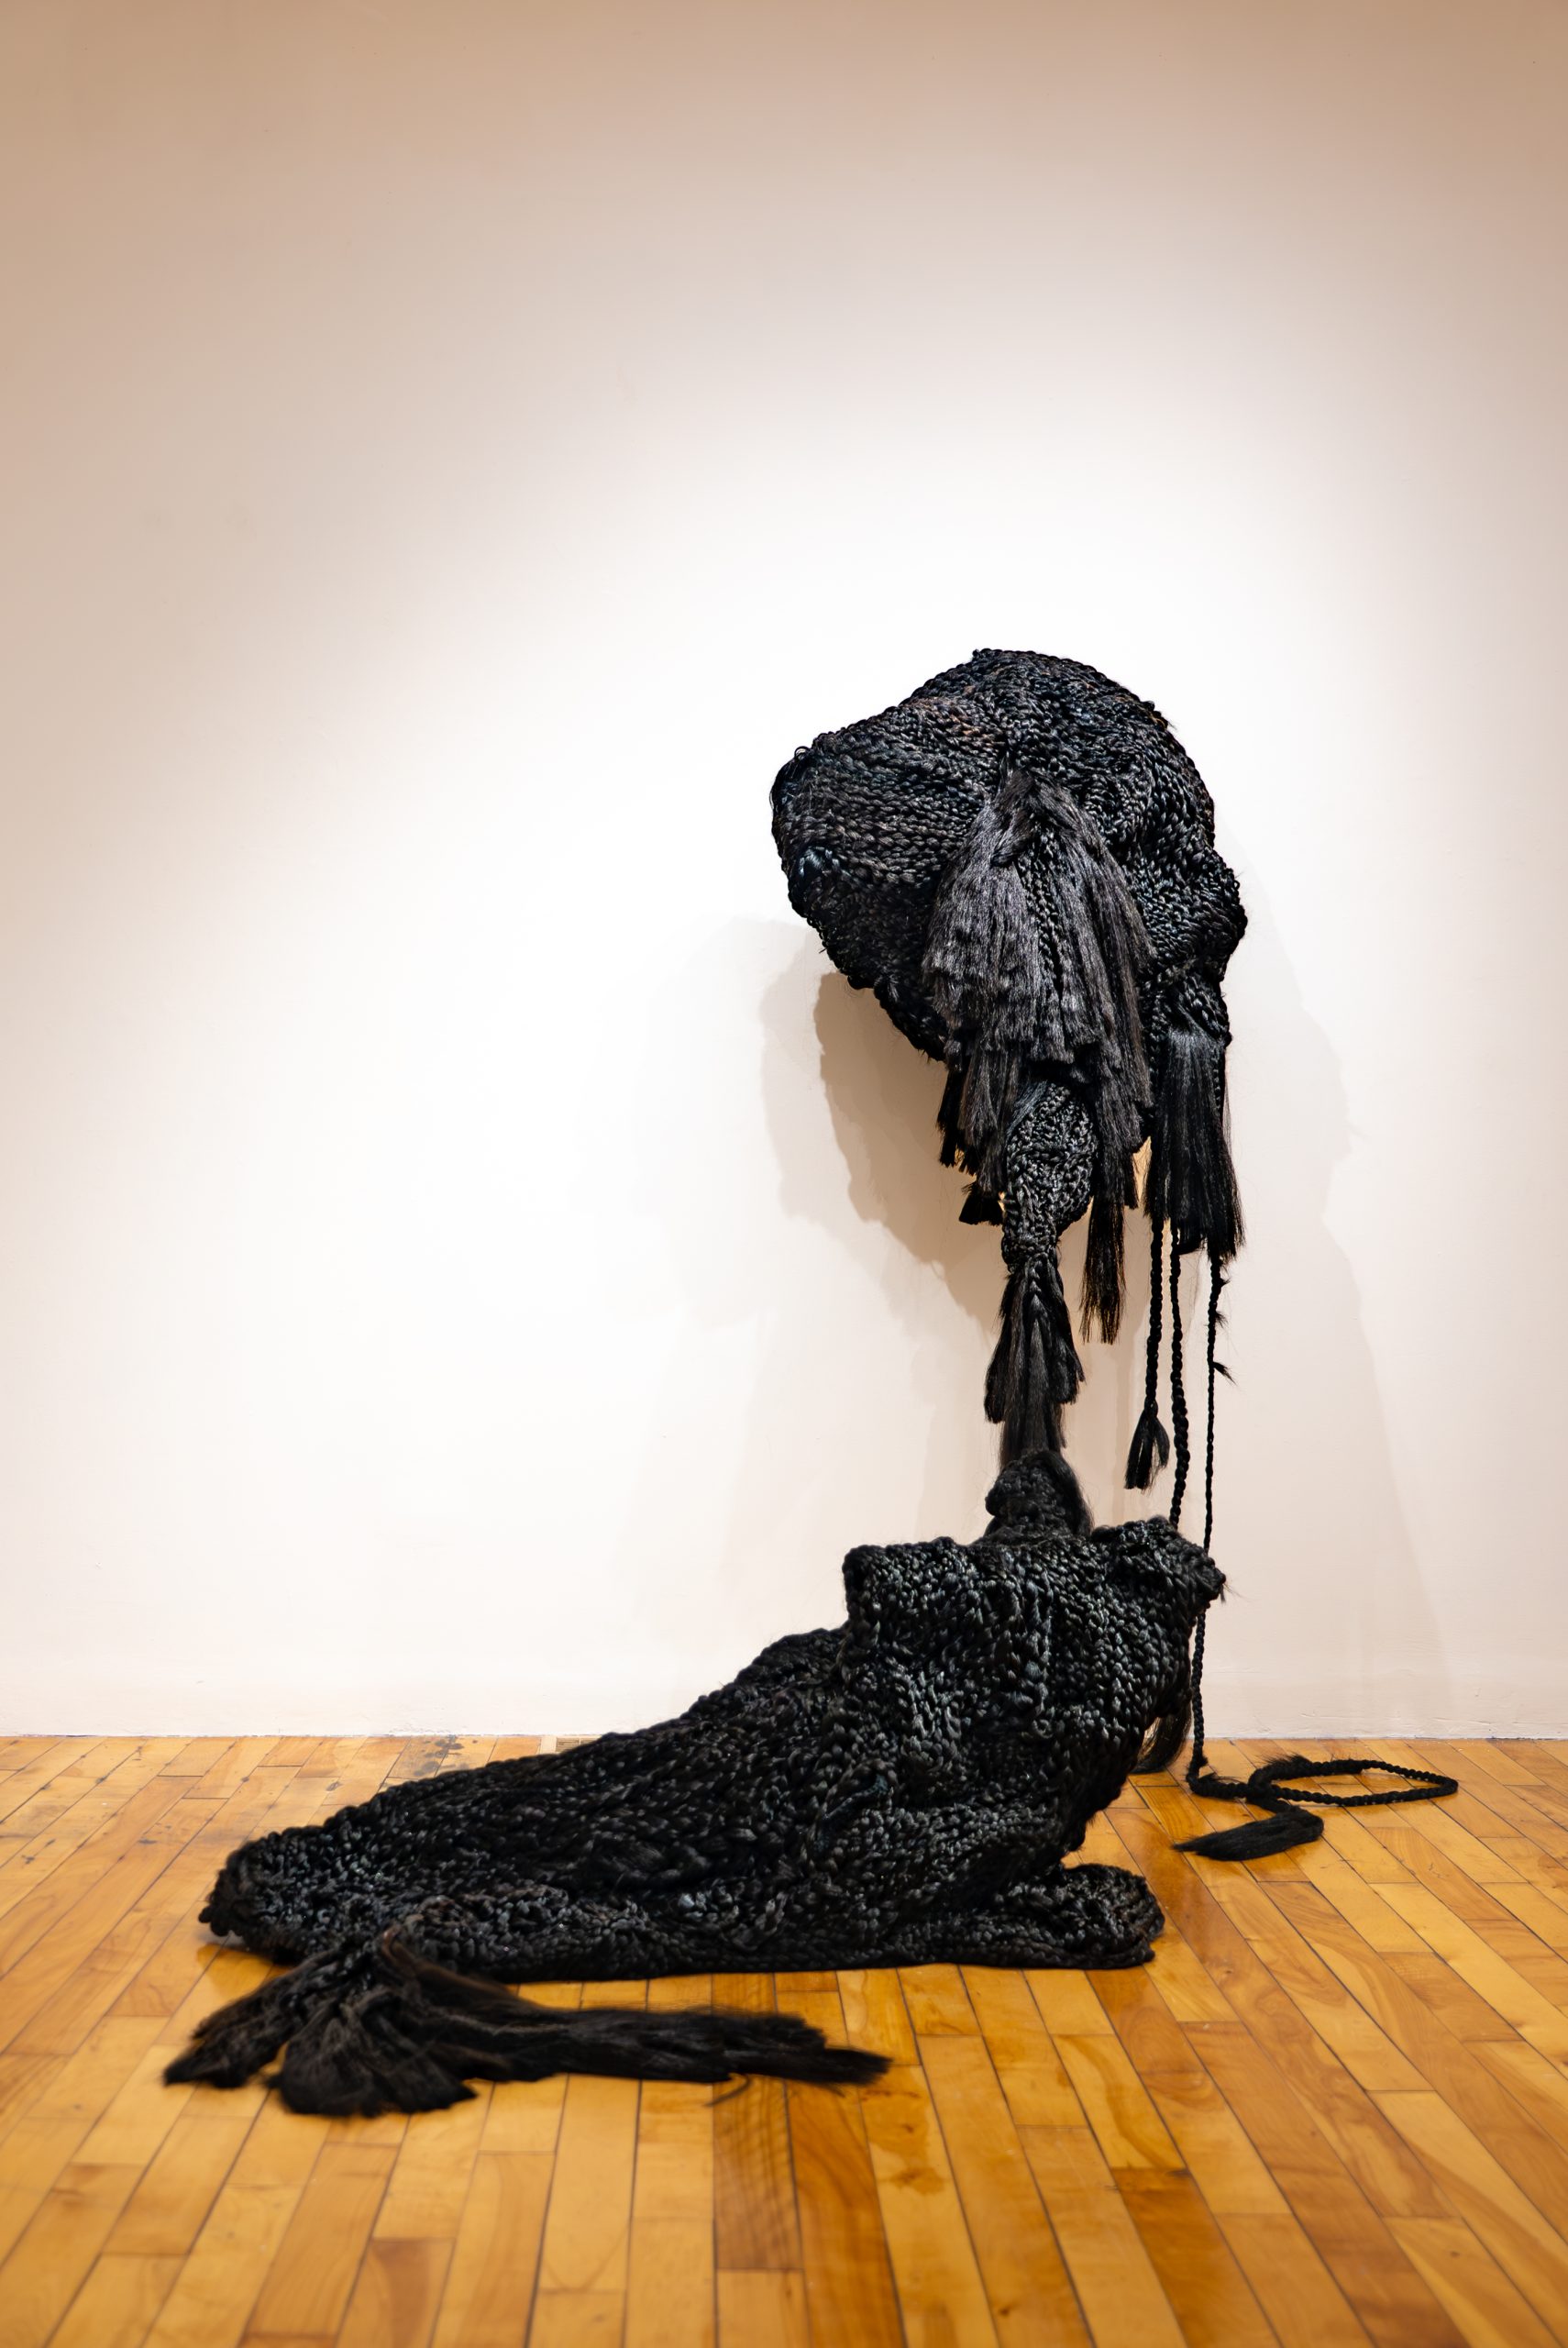 Veronica A. Perez, "ecotone/echotone," 2023. Artificial hair, bobby pins: wall piece; 79 in. tall x 40 in. wide x 36 in. deep; floor piece; 26 in. tall x 48 in. long x 25 in. deep. Part of shadow / echo / memory, University of Southern Maine Art Gallery, 2023.